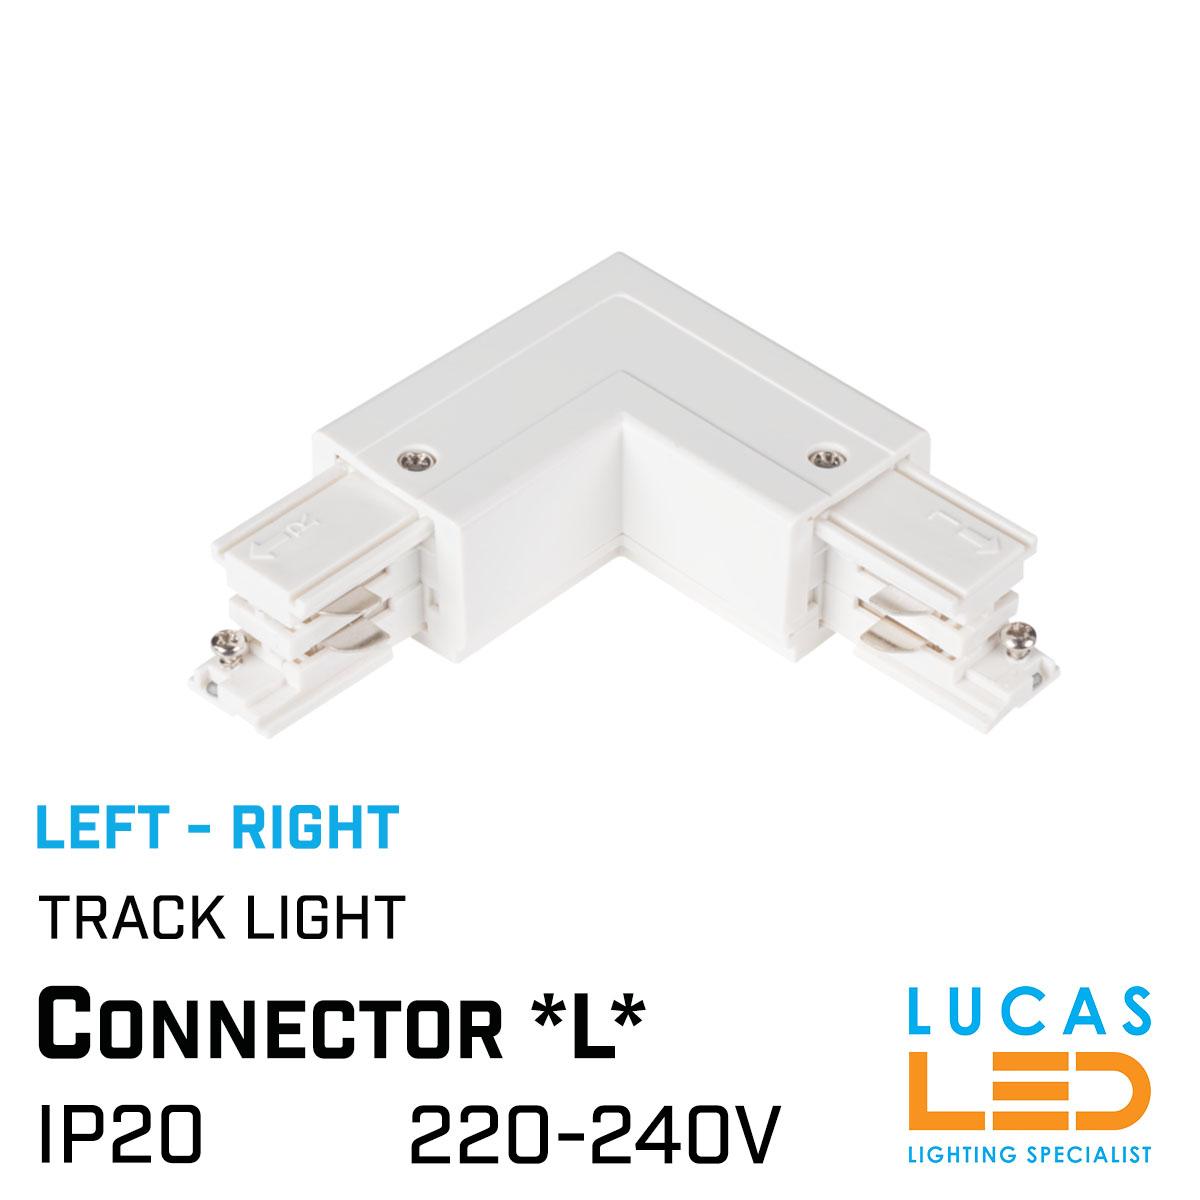 CONNECTOR - L - LEFT & RIGHT - for Rail - LED Track Lighting system - 3-phase - 3 circuit - LR - White